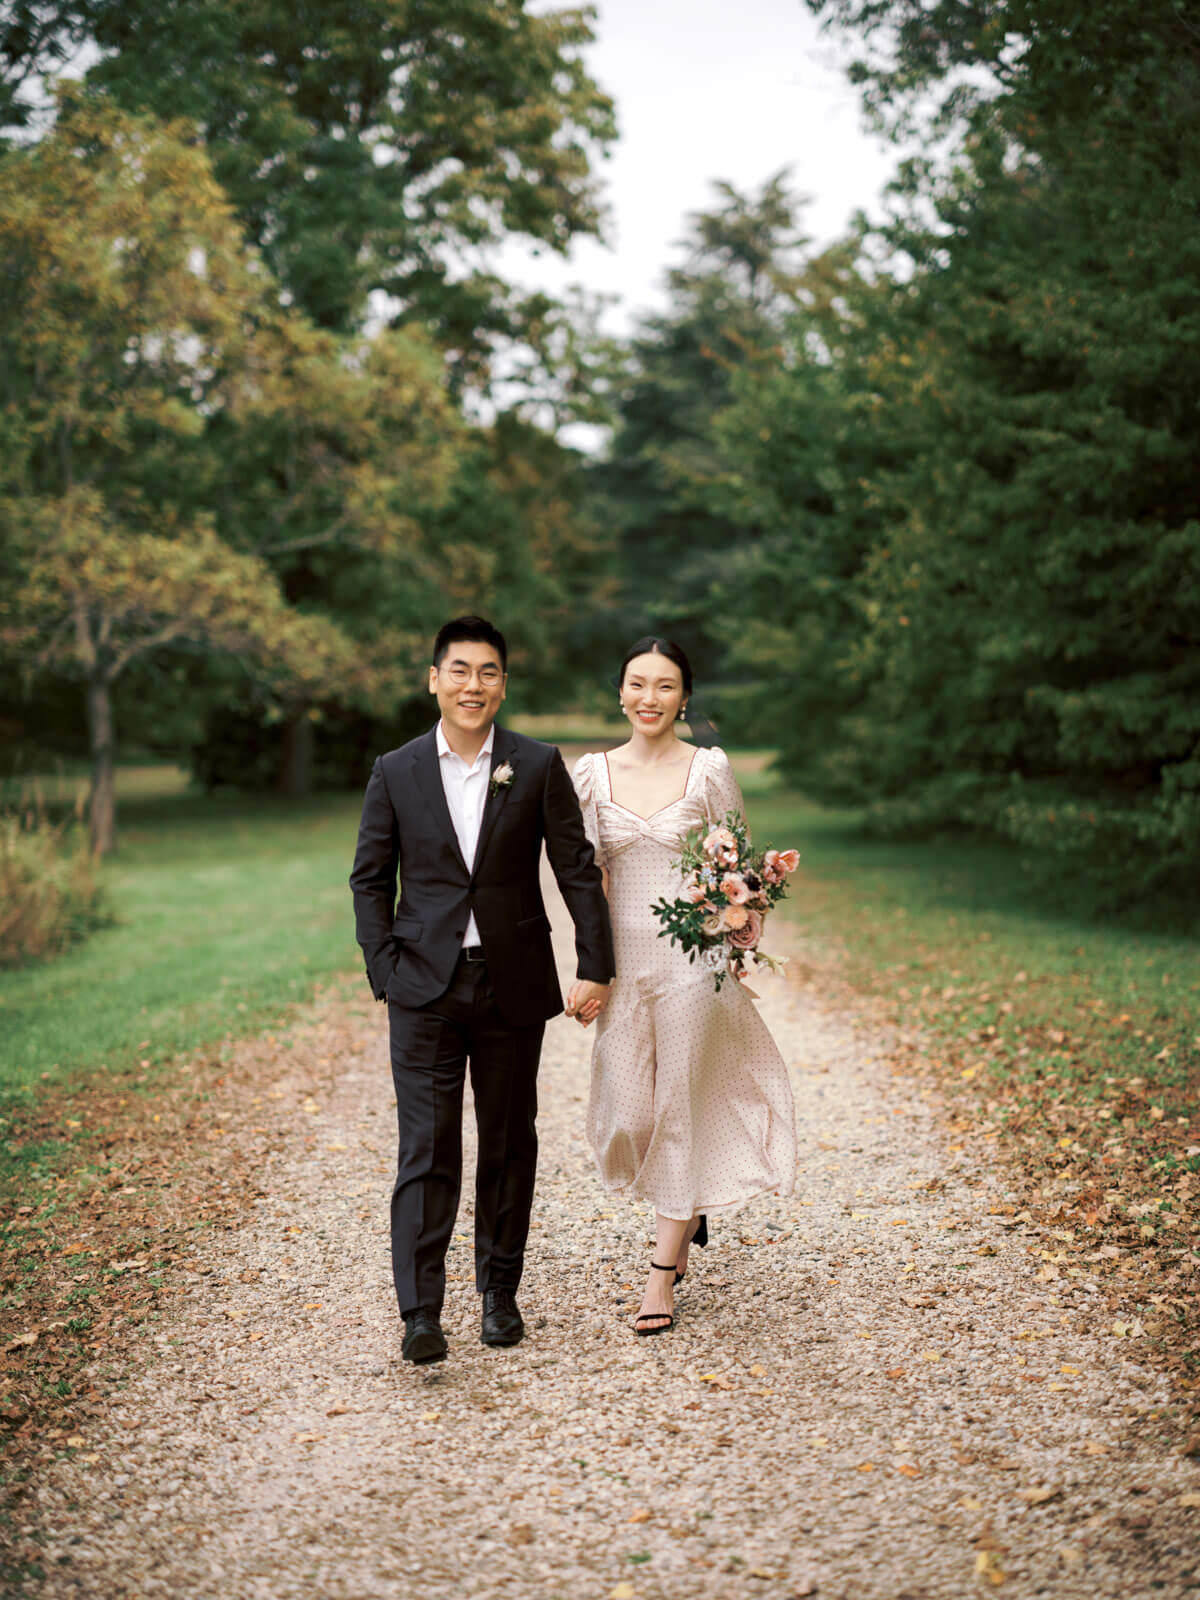 The engaged couple is standing on a trail filled with fall leaves, amidst the beautiful fall foliage. Image by Jenny Fu Studio